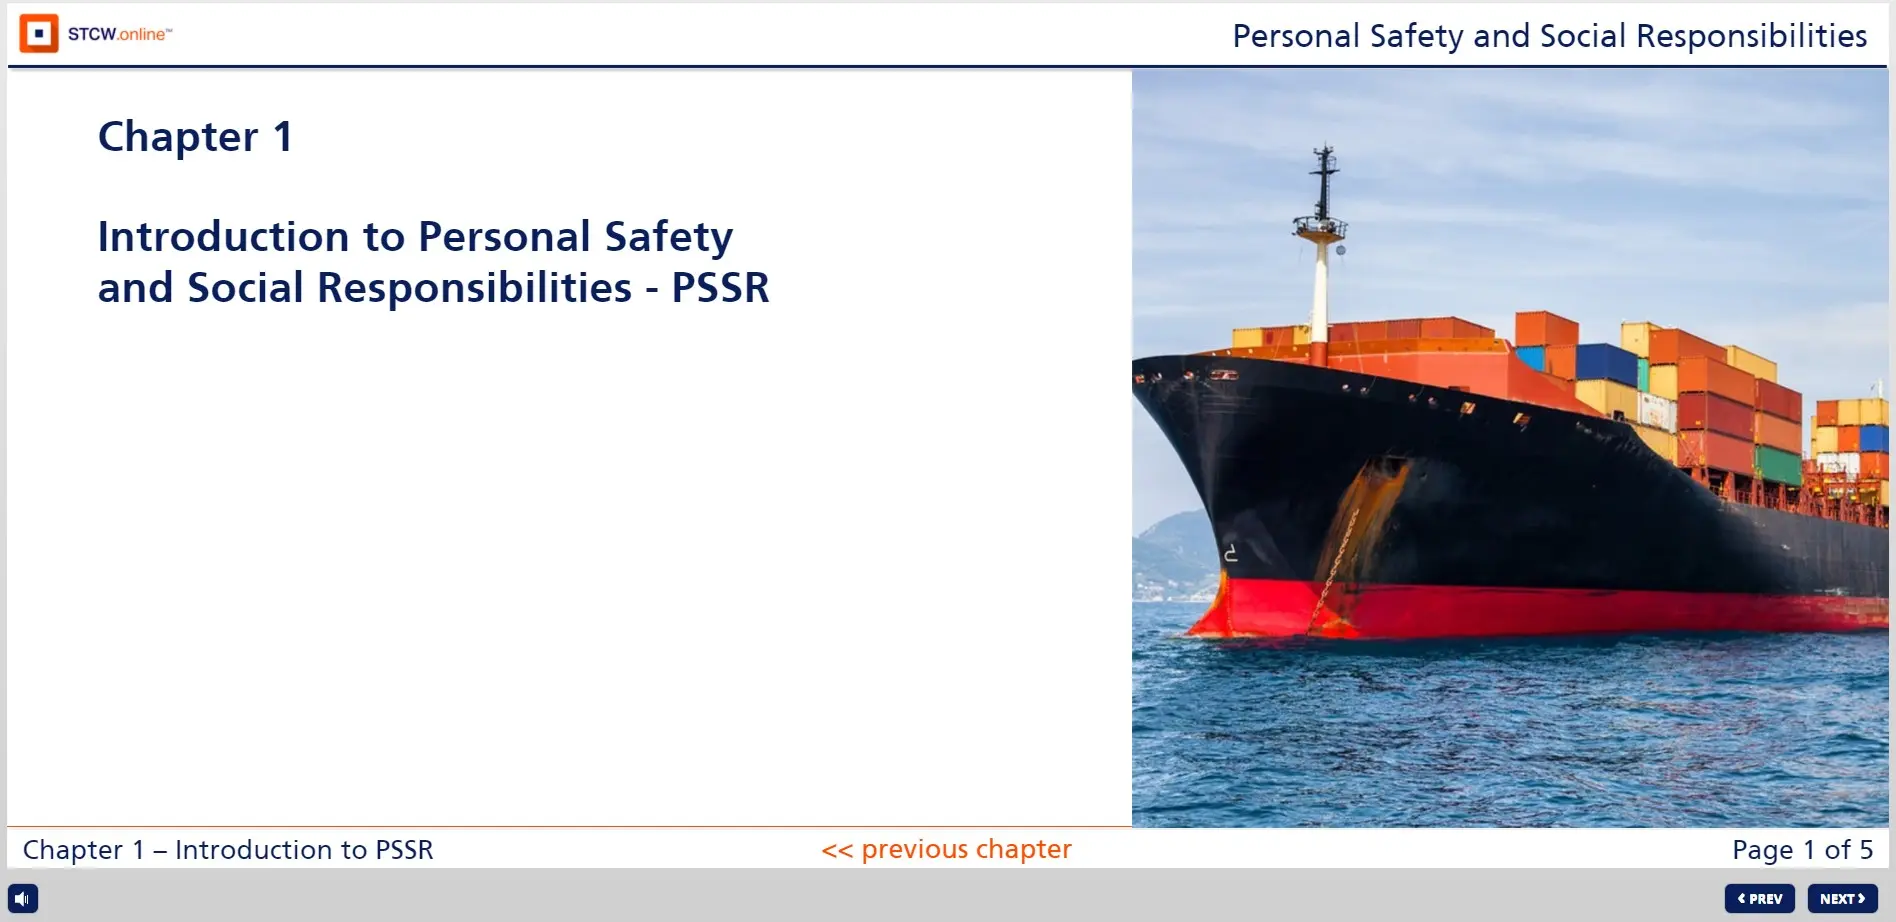 Personal Safety and Social Responsibilities 2